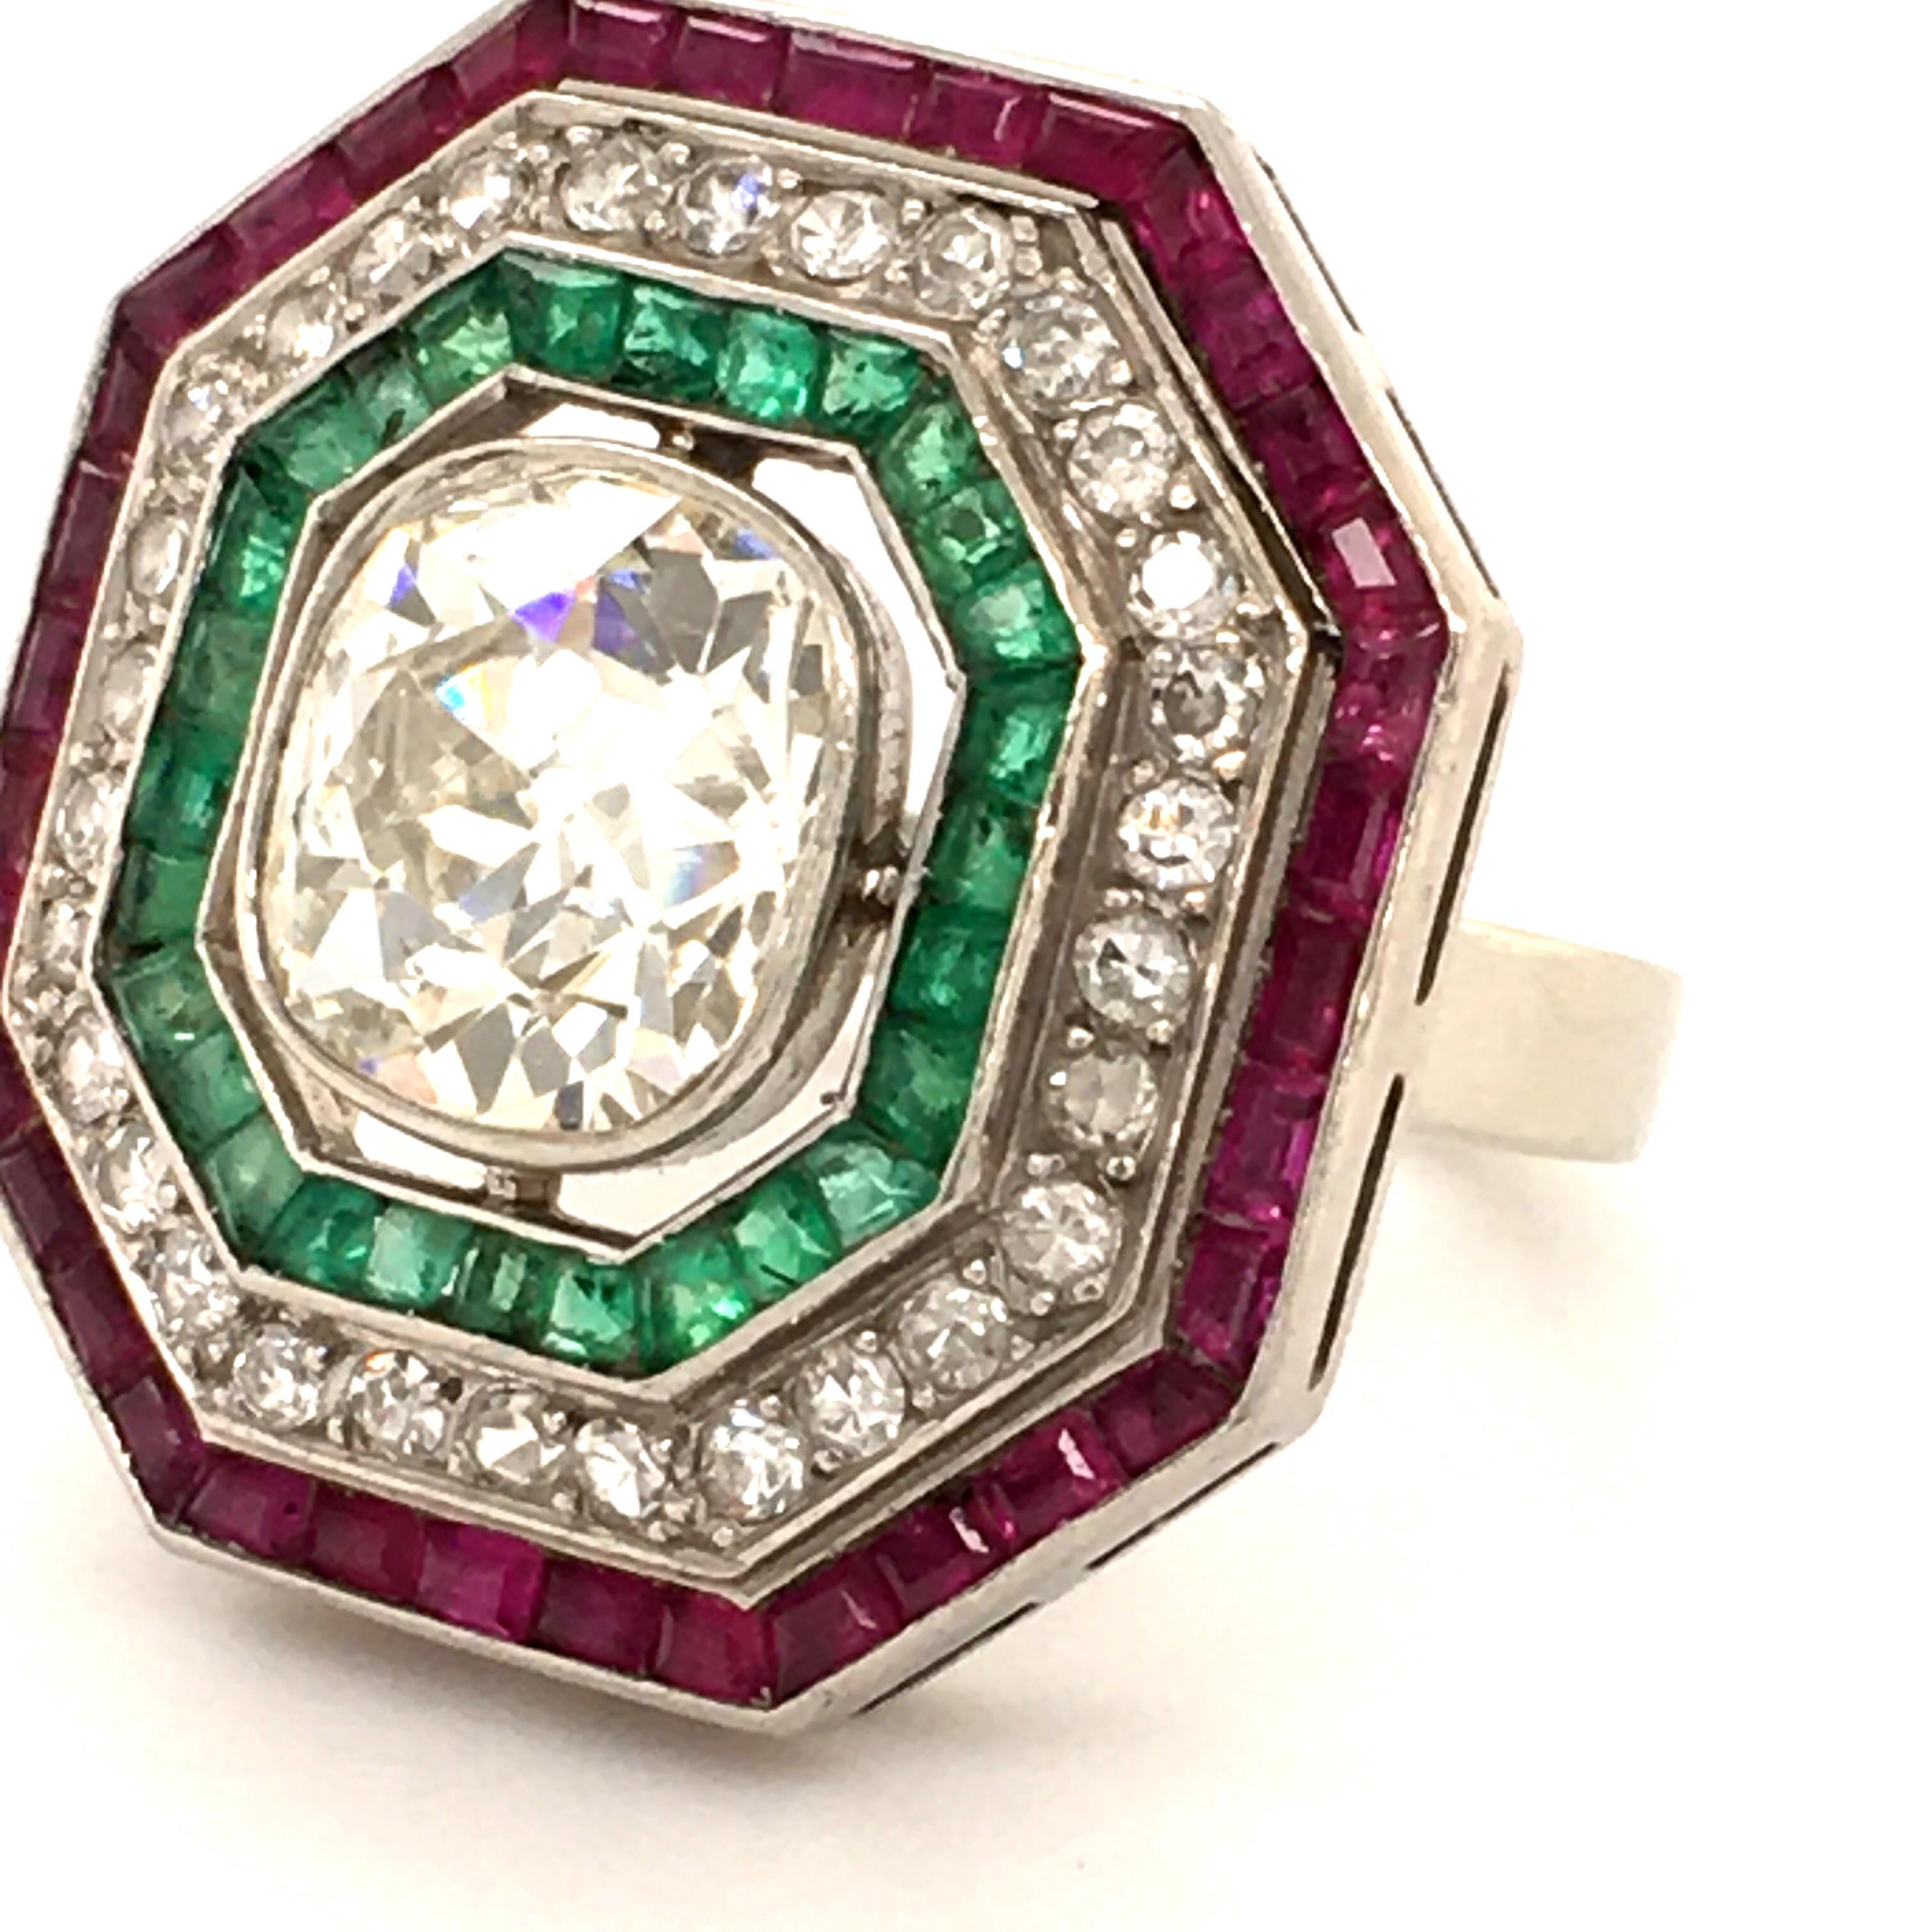 Art Deco Antique Old Cut Diamond Ring in Platinum 950 with Emeralds and Rubies